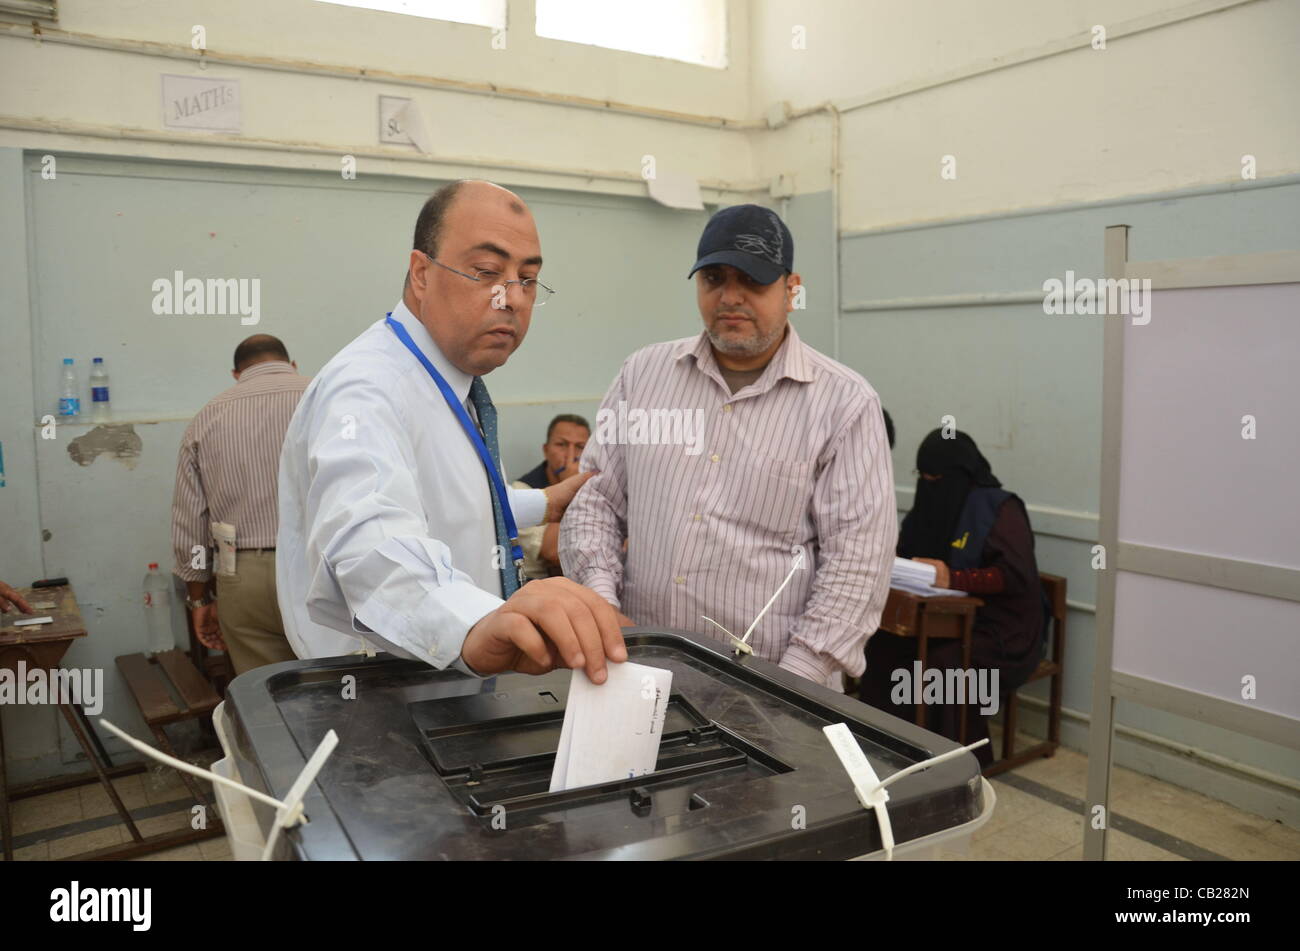 Voting underway May 2012 in Egypt's first Presidential poll since the overthrow of autocratic ruler Hosni Mubarak in Feb 2011. Stock Photo